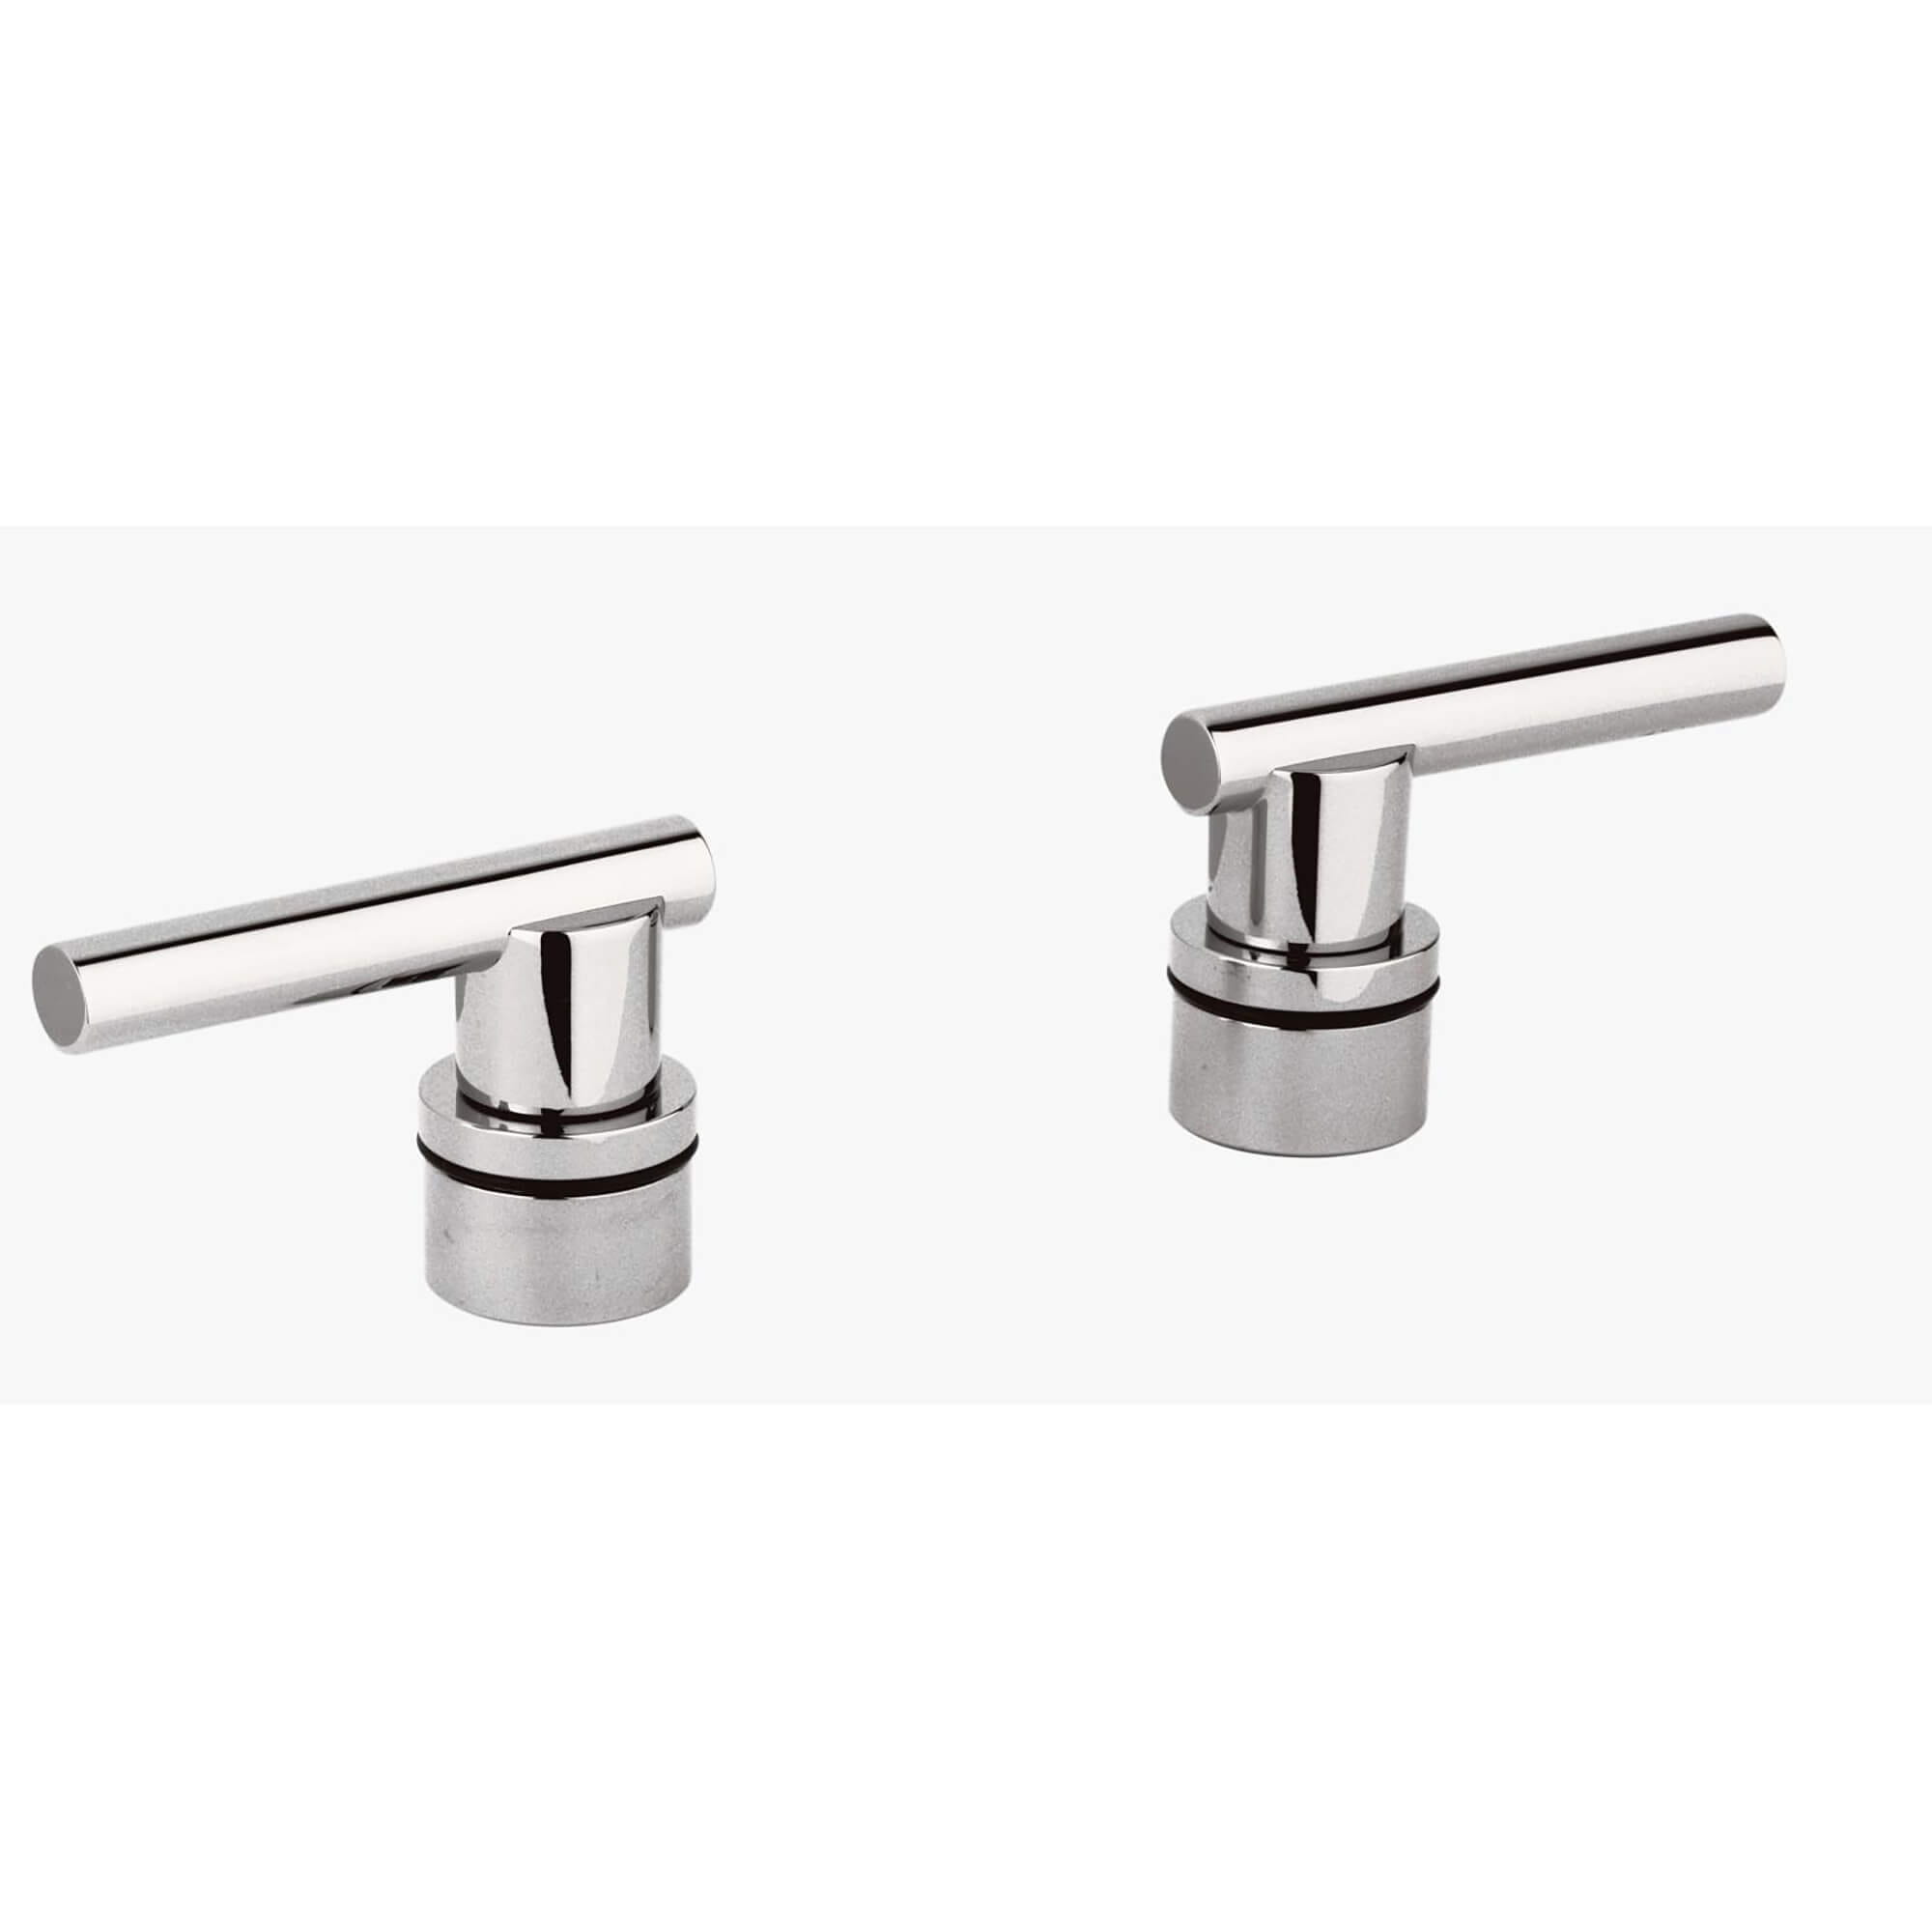 Lever Handles Pair GROHE POLISHED NICKEL